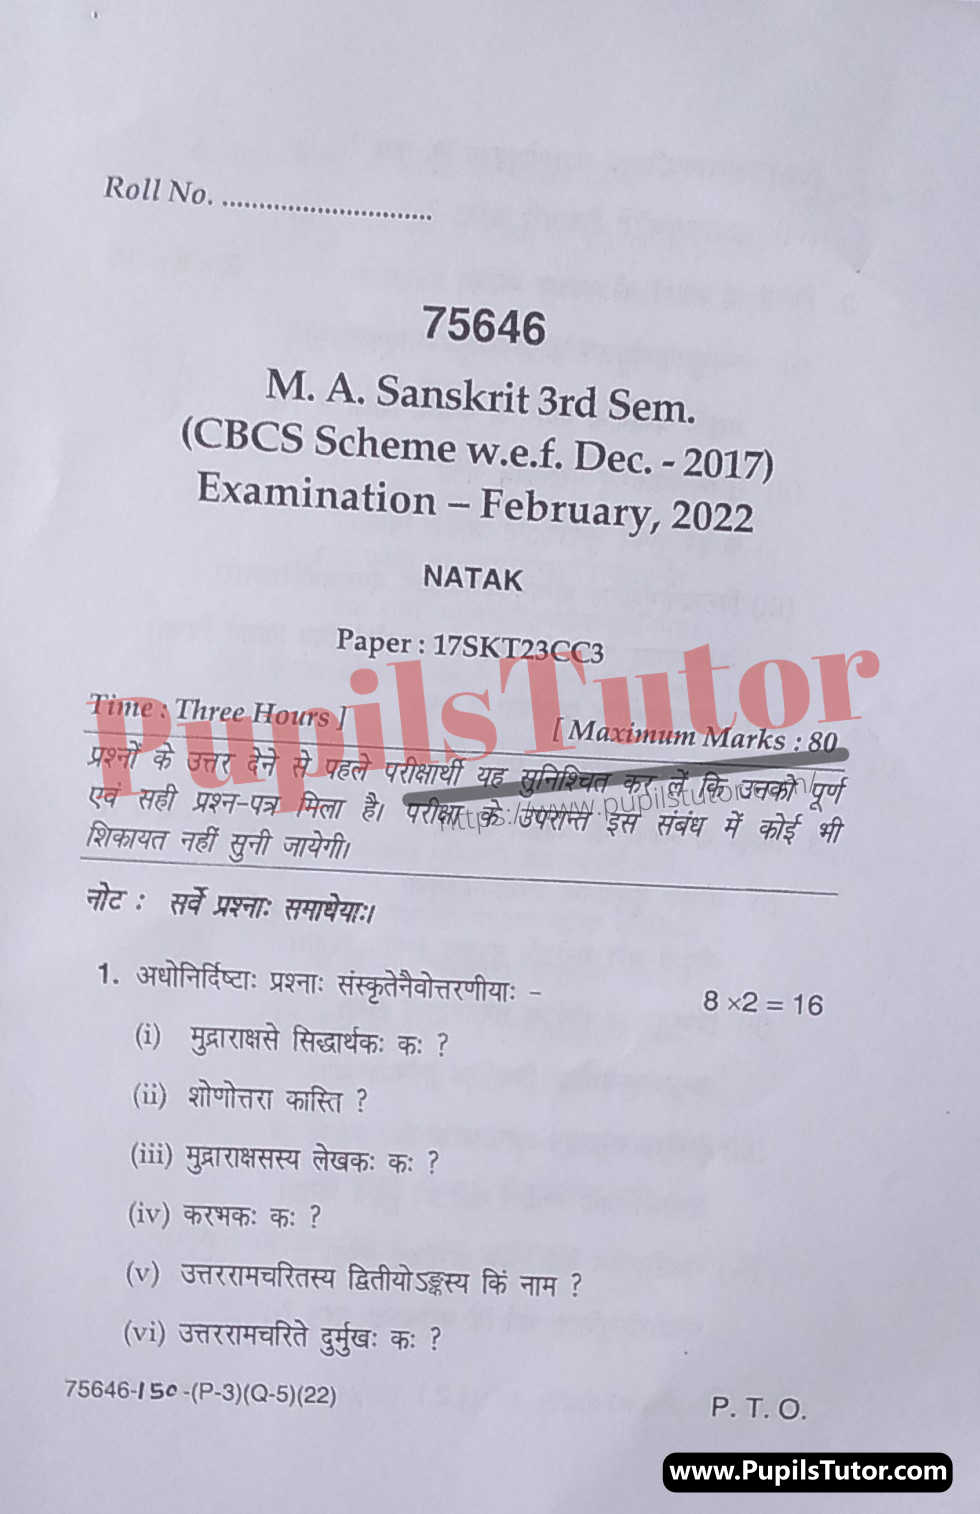 MDU (Maharshi Dayanand University, Rohtak Haryana) MA Sanskrit CBCS Scheme Third Semester Previous Year Natak Question Paper For February, 2022 Exam (Question Paper Page 1) - pupilstutor.com